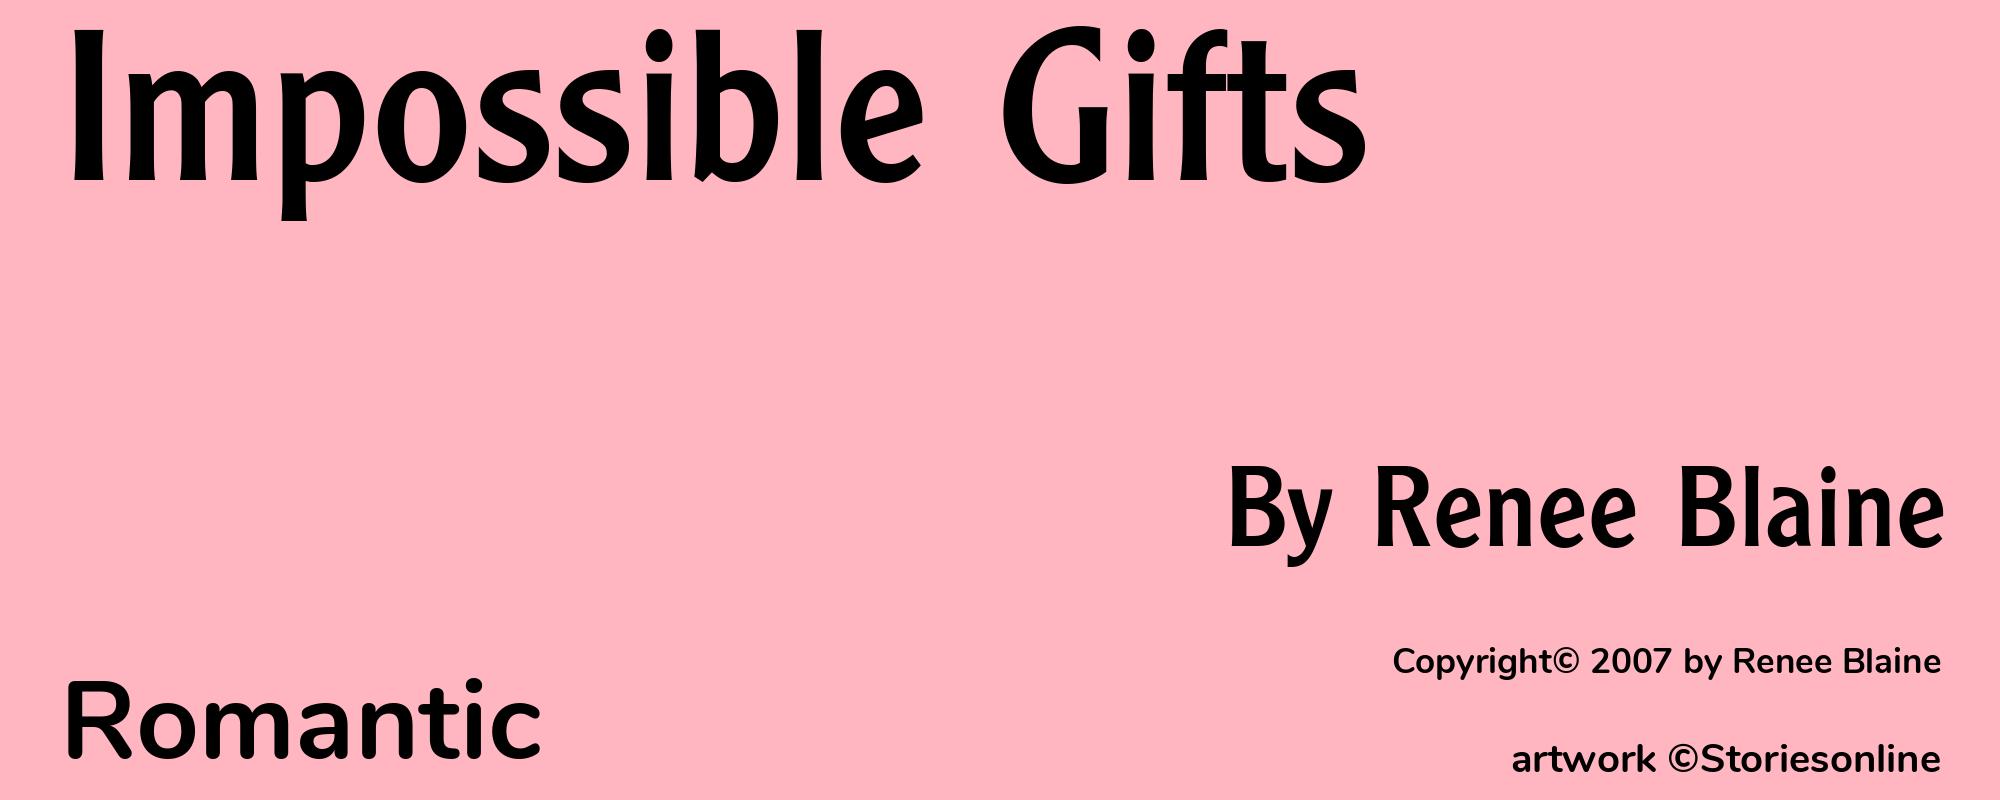 Impossible Gifts - Cover